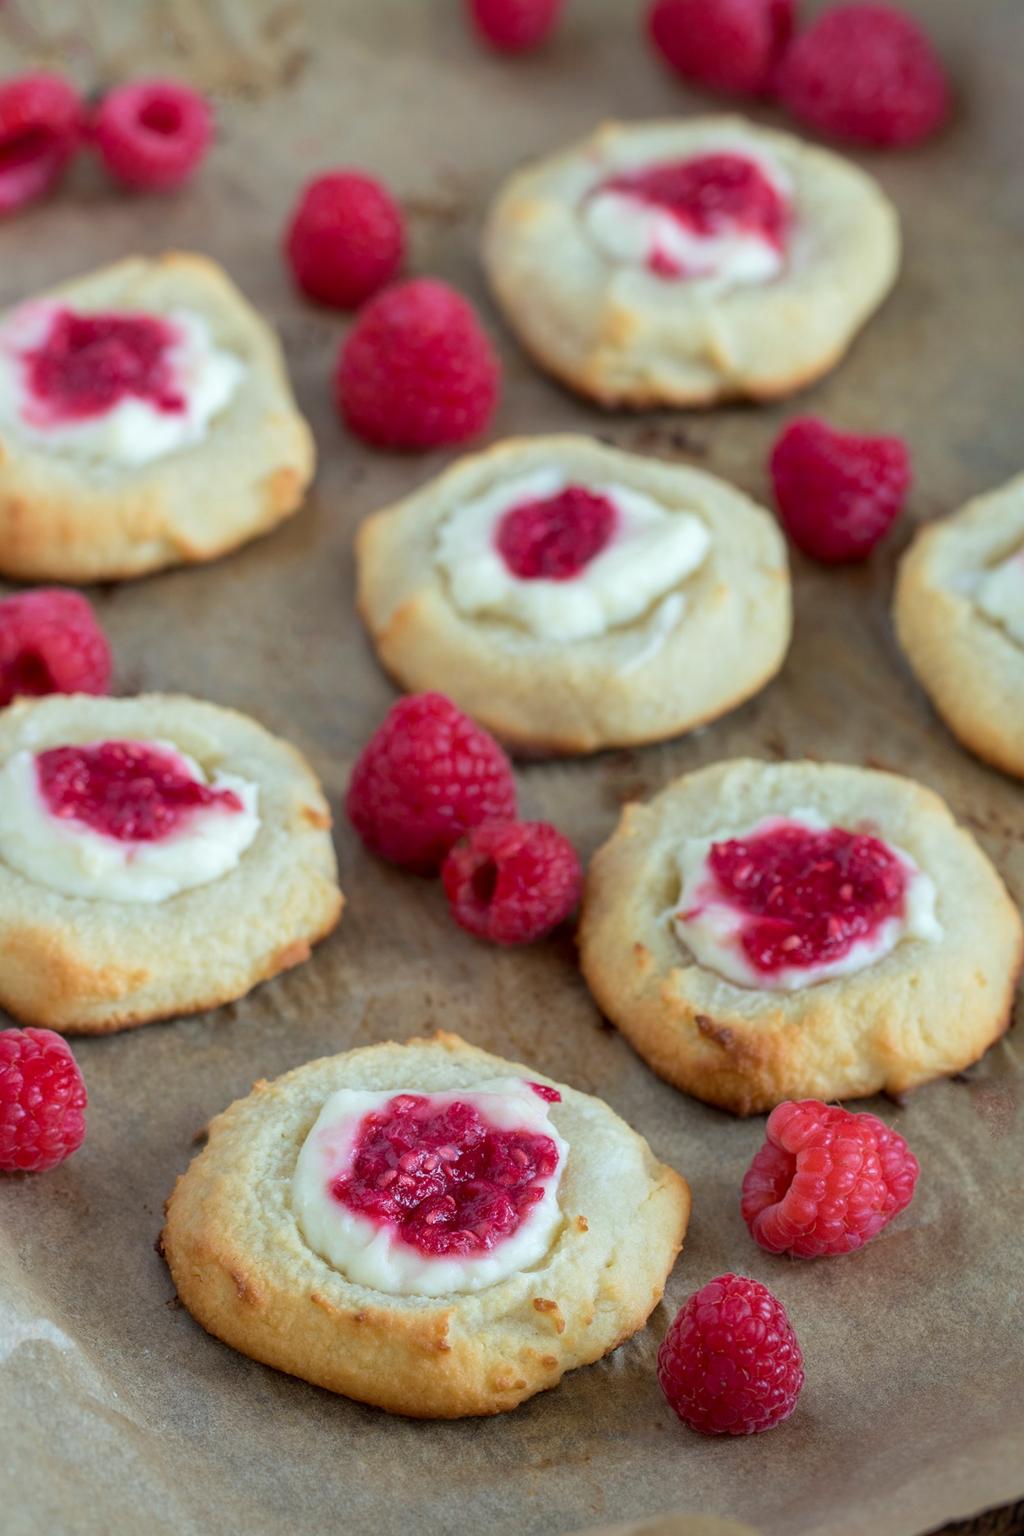 Raspberry Danish Cookies All your favorite things about Danishes turned into bite-sized, baked-toperfection cookies! Sweet, tart and delightfully dense! nutrition per 2 cookies 4 oz.